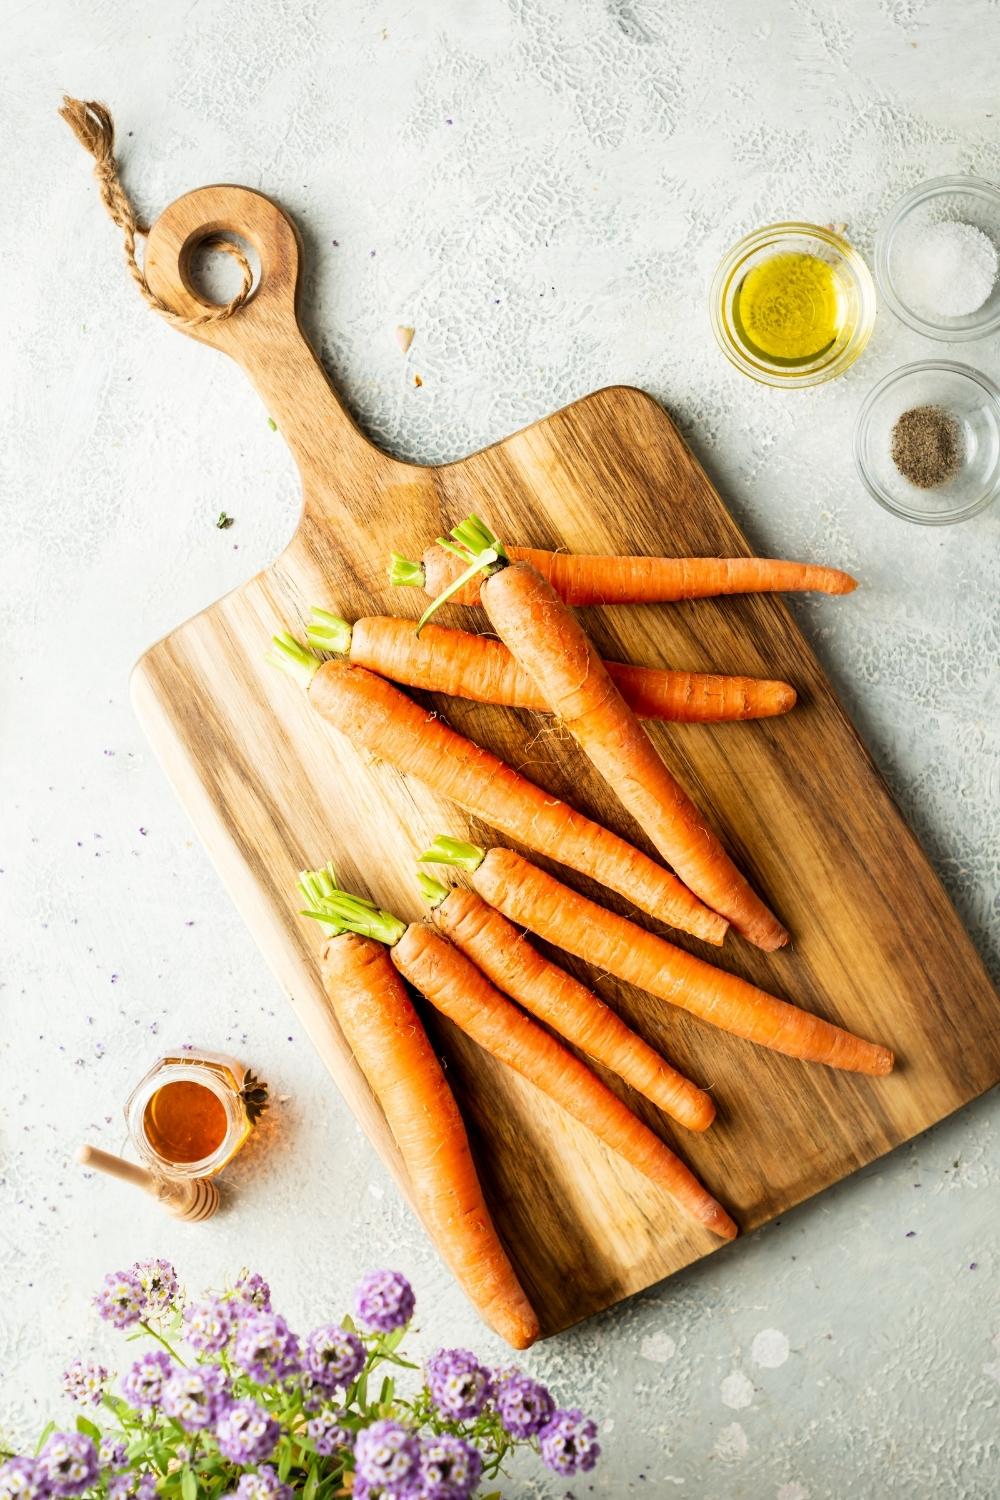 raw trimmed carrots on a wooden cutting board